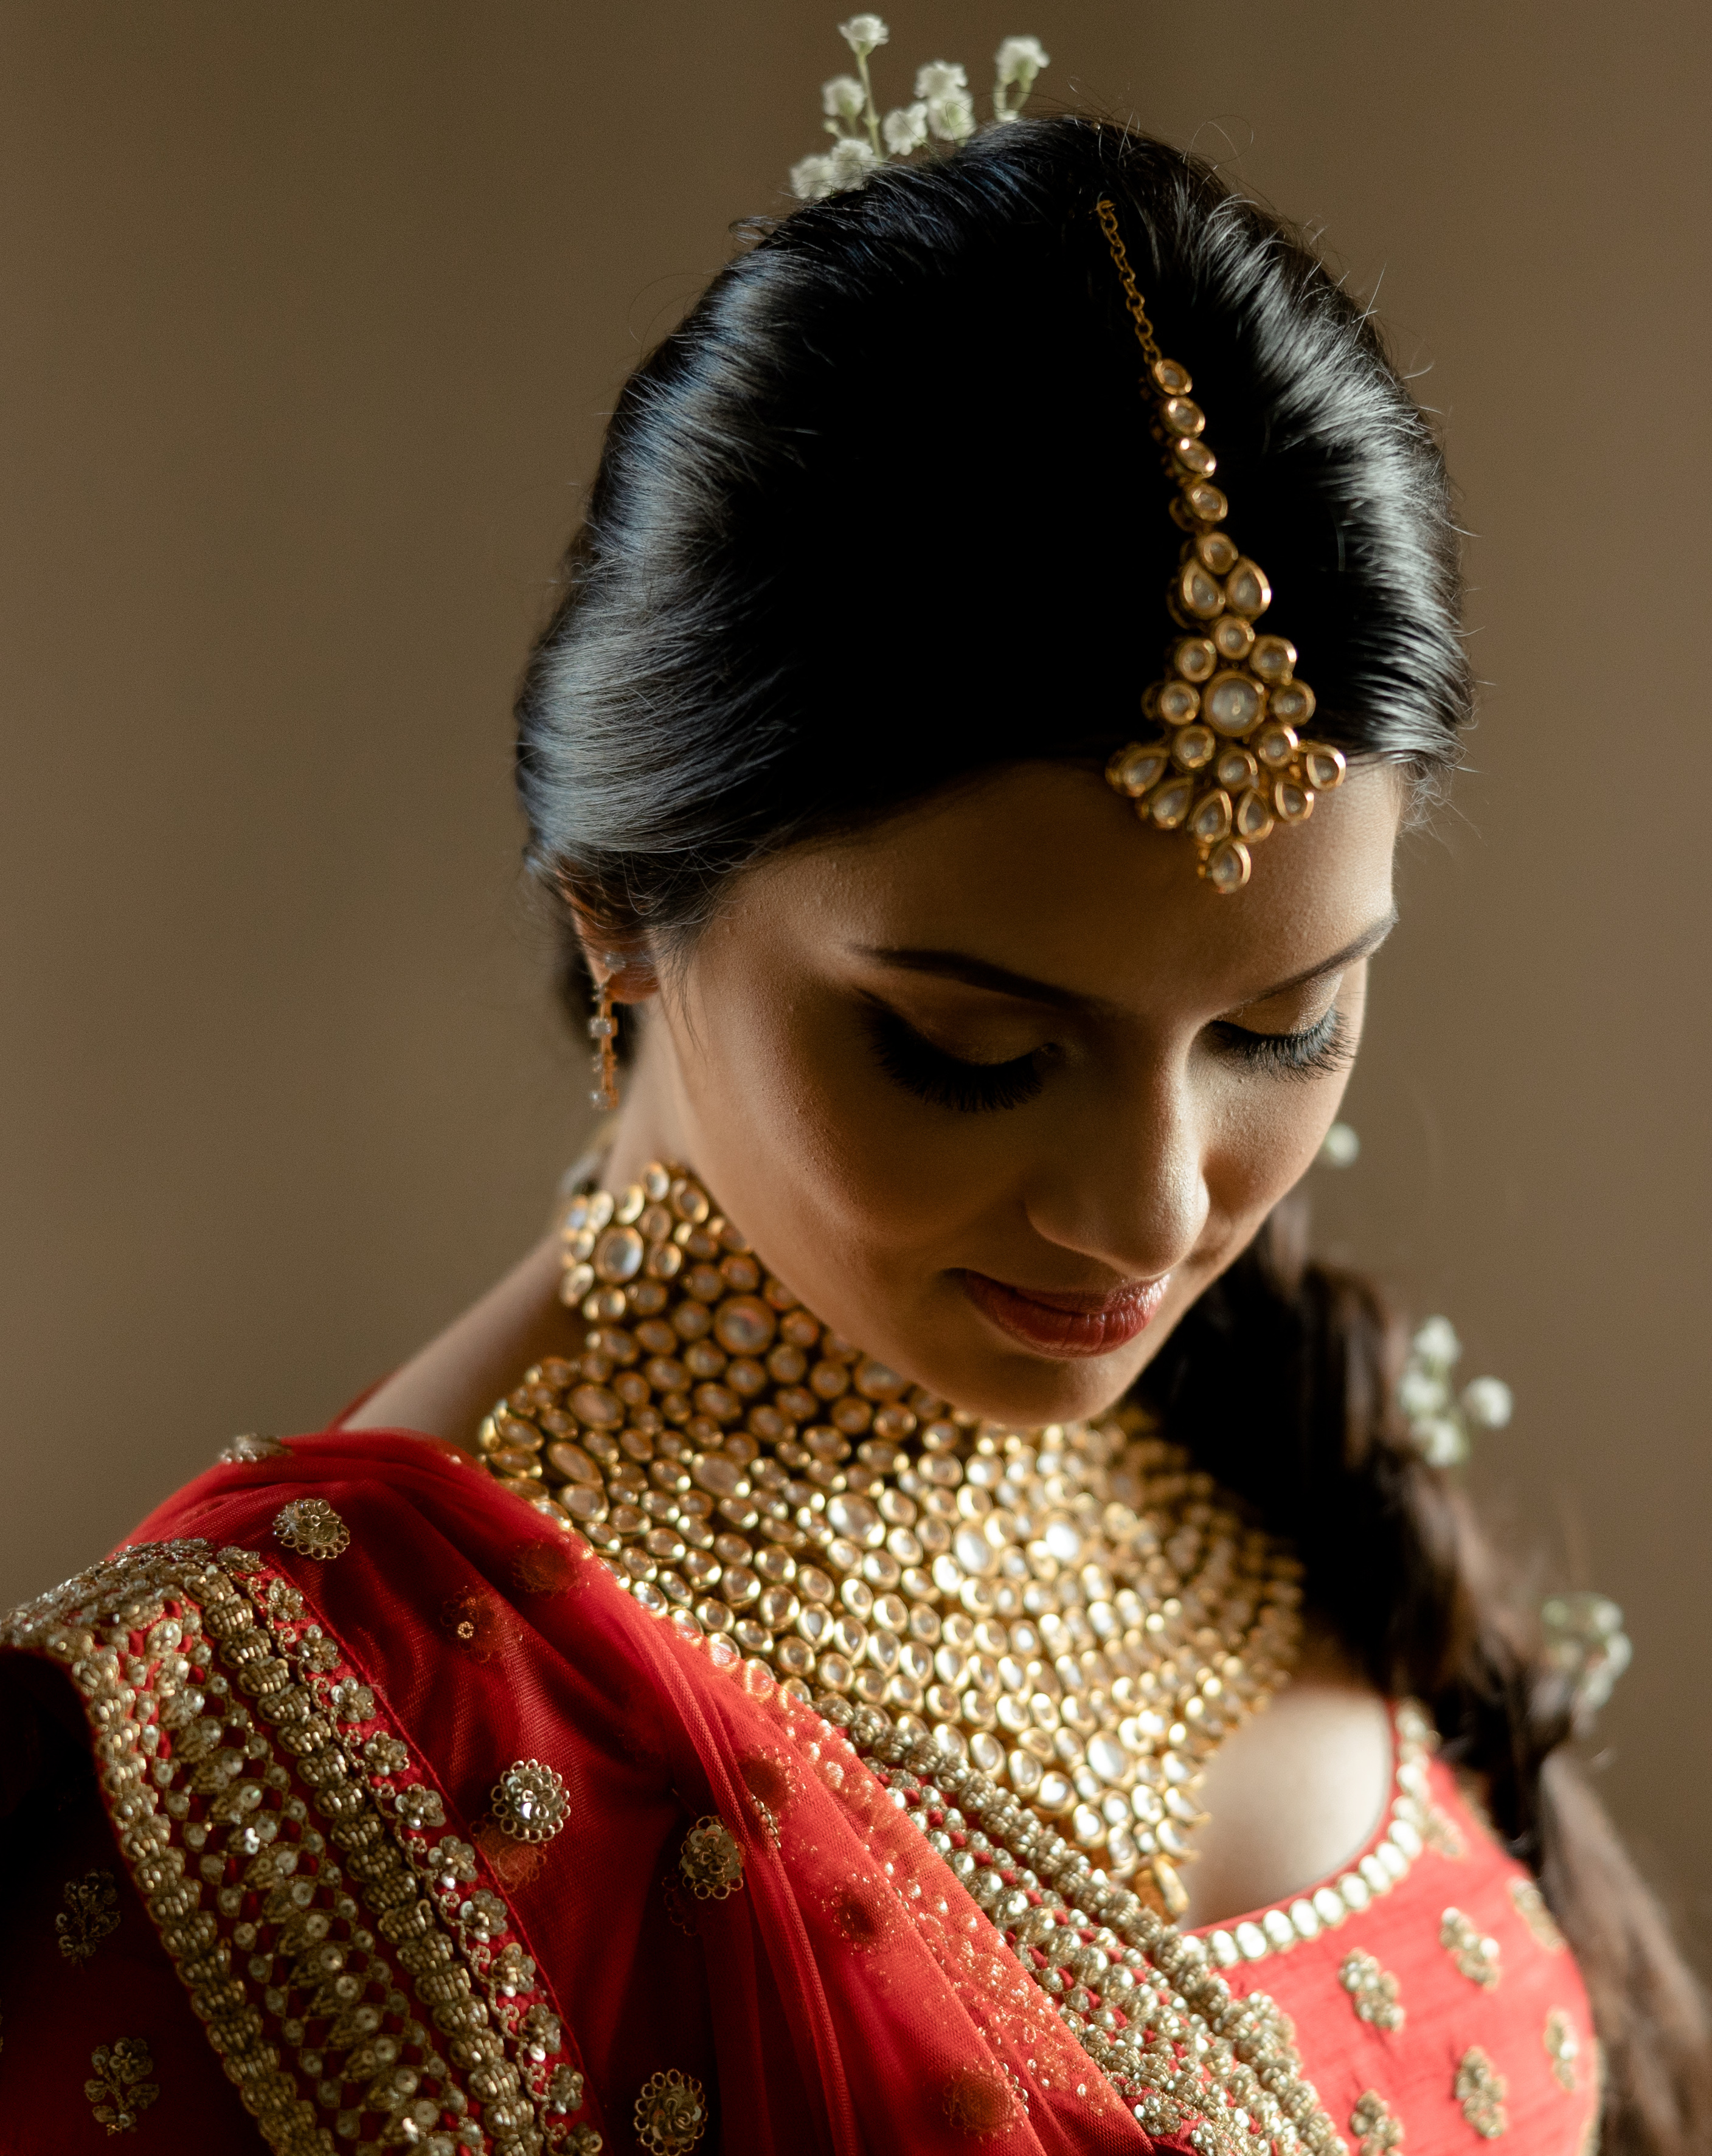 The bride wears traditional gold Hindu jewelry and attire for her wedding ceremony. 